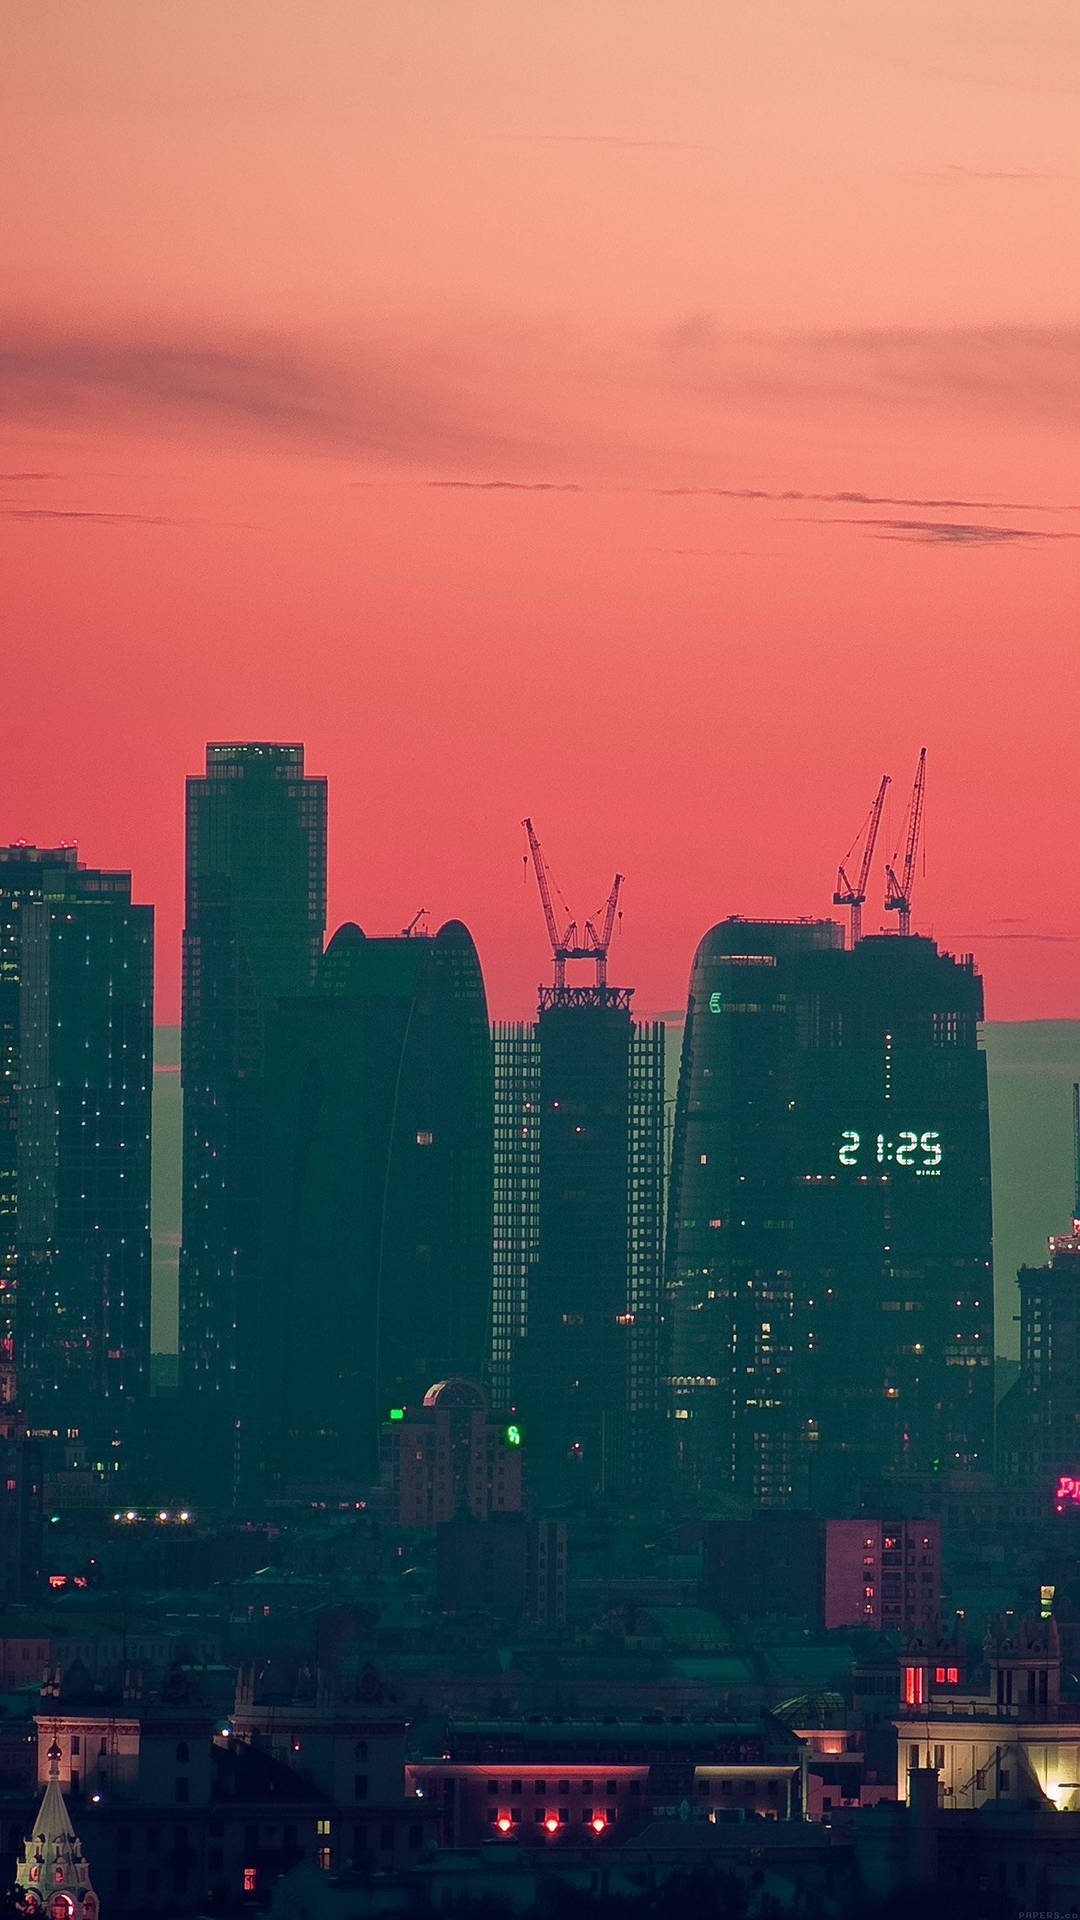 City Silhouette At Sunset Smartphone Background Wallpaper